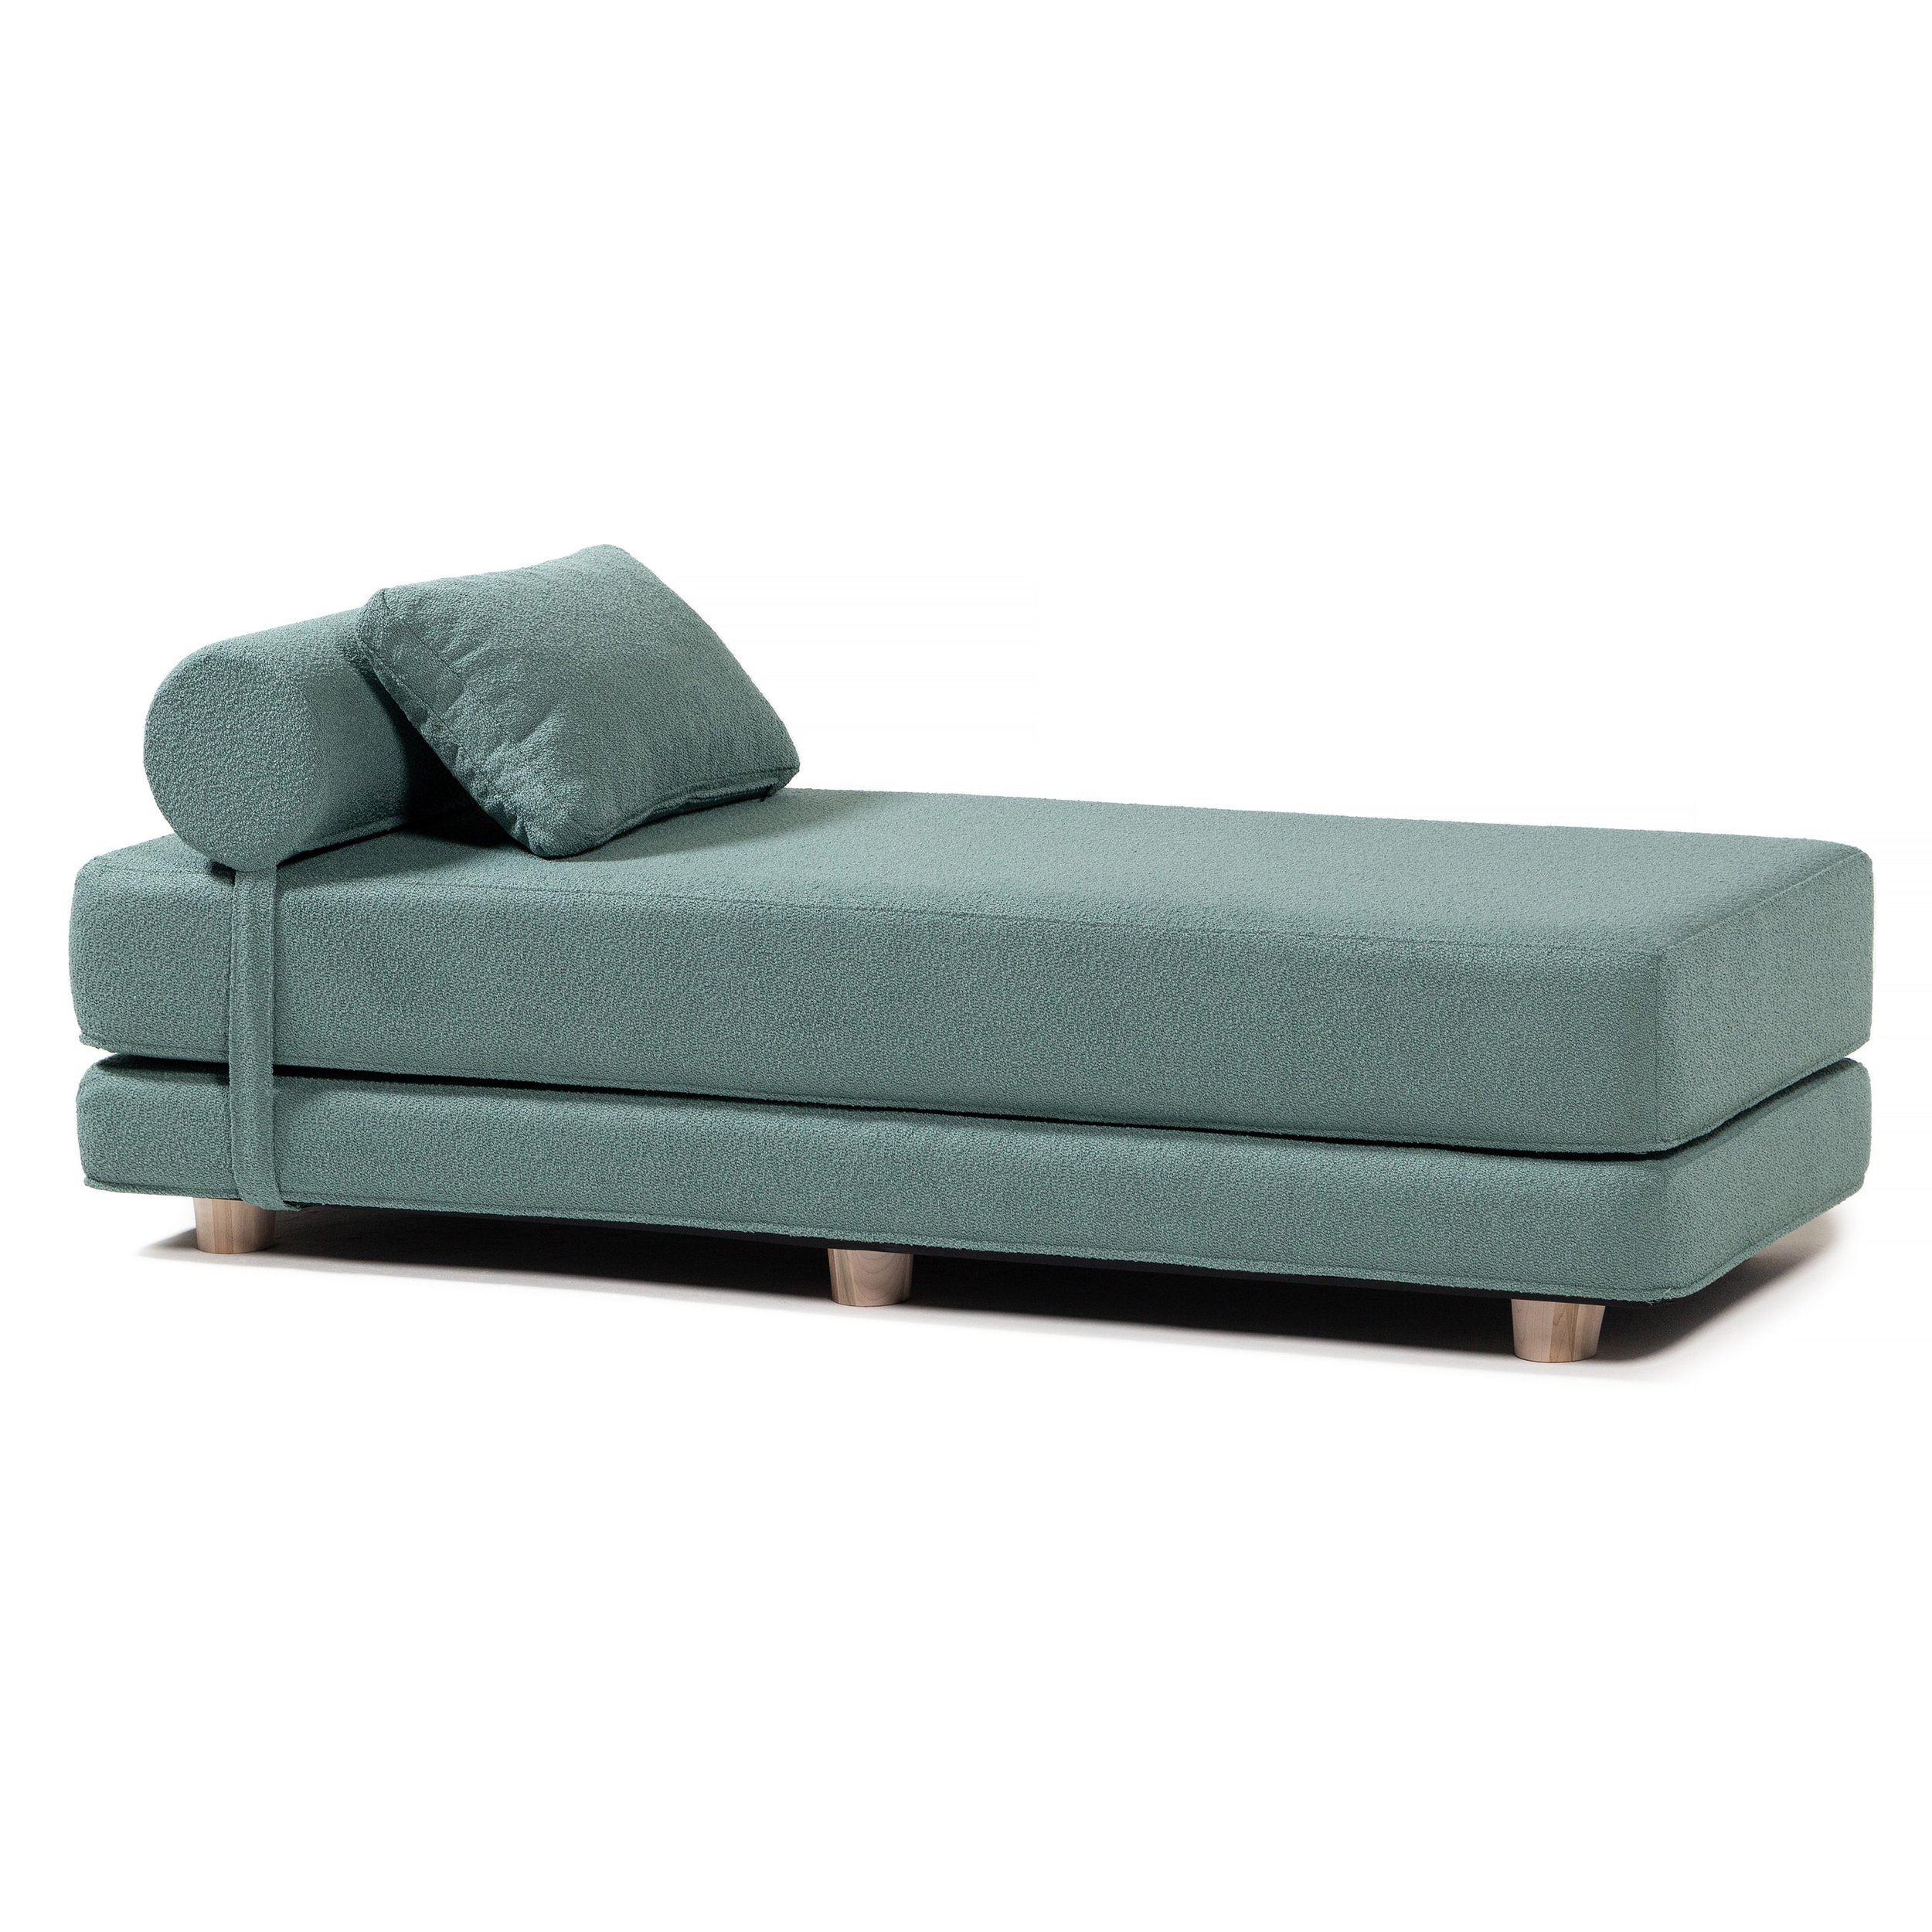 avida-daybed-boucle-green-gladys024-product-1-3000x3000.jpg